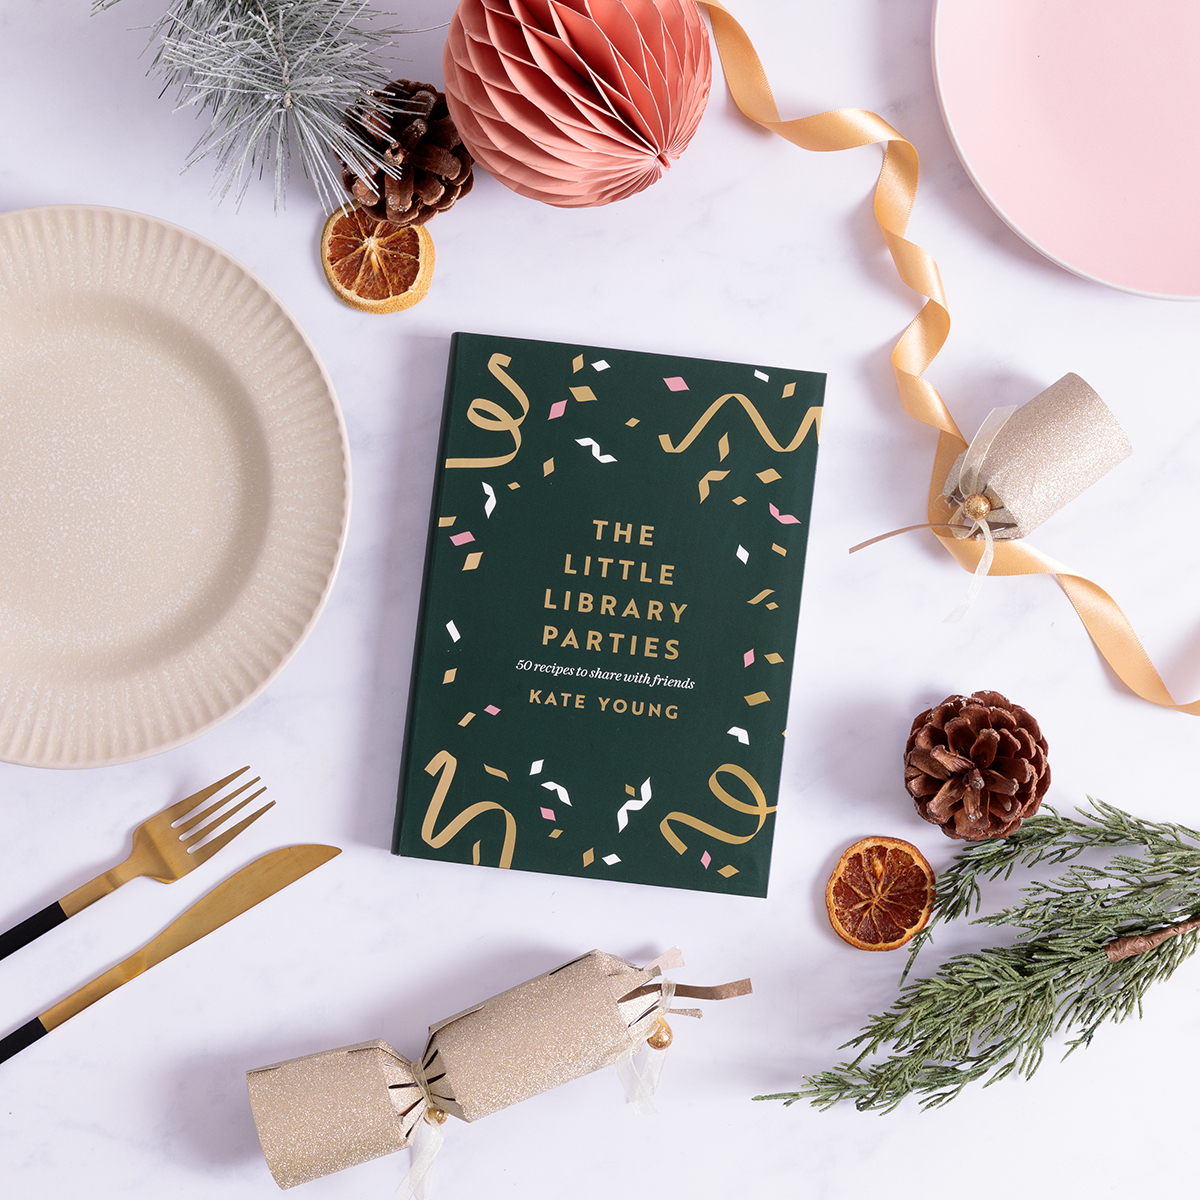 On the 1st day of Xmas, @HoZ_Books gave to me... 🎄 A giveaway! To celebrate our 12 days of #TheLittleLibraryParties, we're giving away 1 copy. To enter ✨ RT this post ✨ Follow us ✨ Tag a Xmas loving friend Closes midnight 05/12. UK only. T&Cs: bit.ly/3rPf1Yt